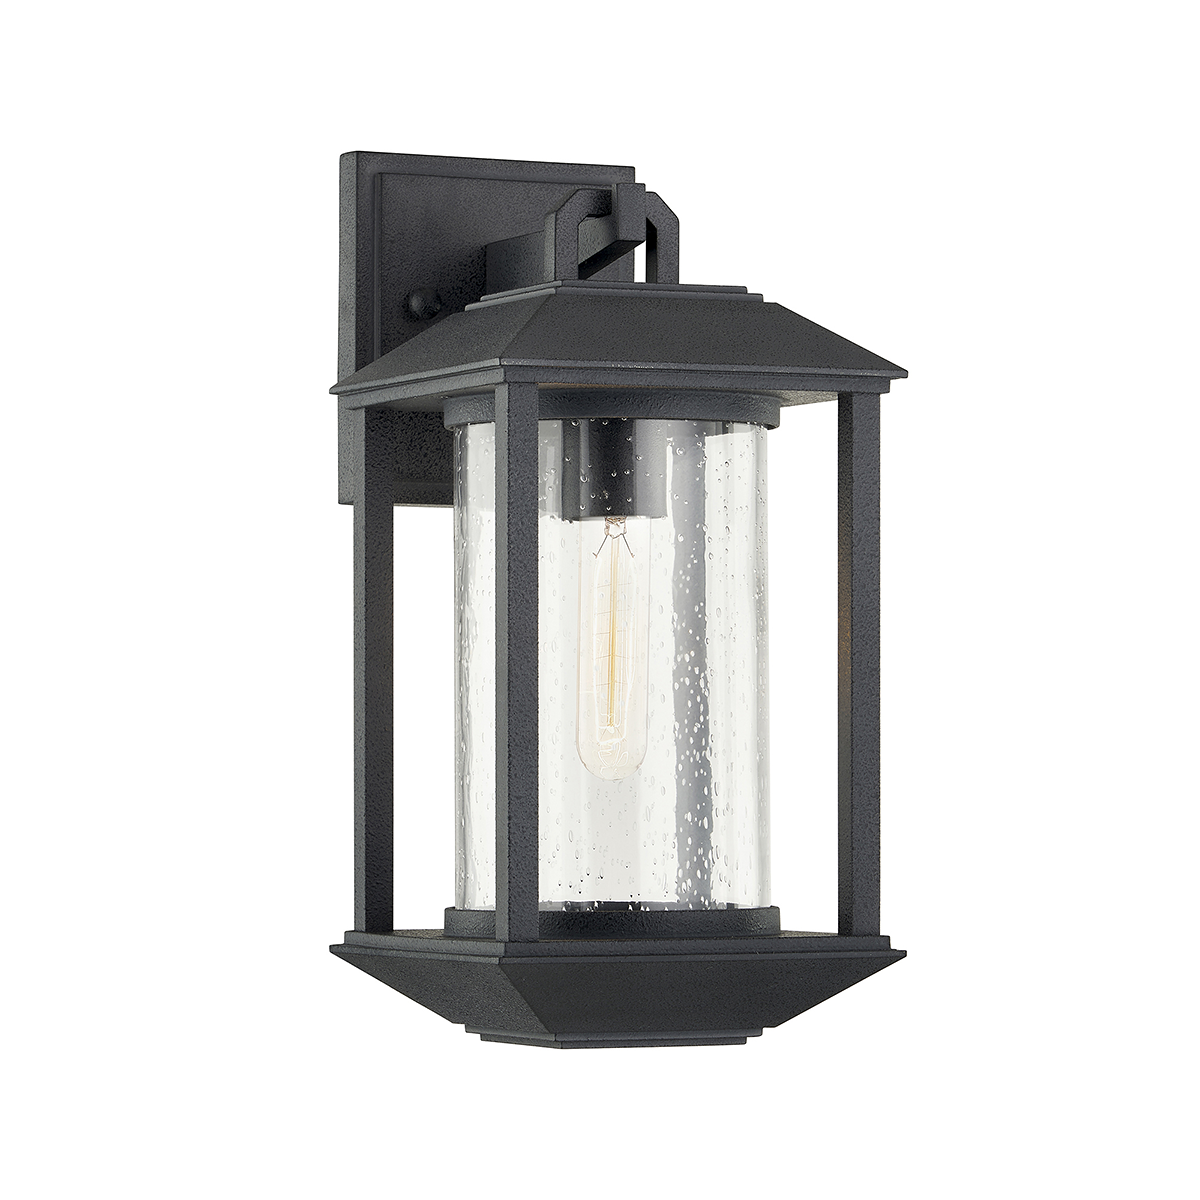 Troy Lighting MCCARTHY 1LT WALL B7281 Outdoor l Wall Troy Lighting WEATHERED GRAPHITE  